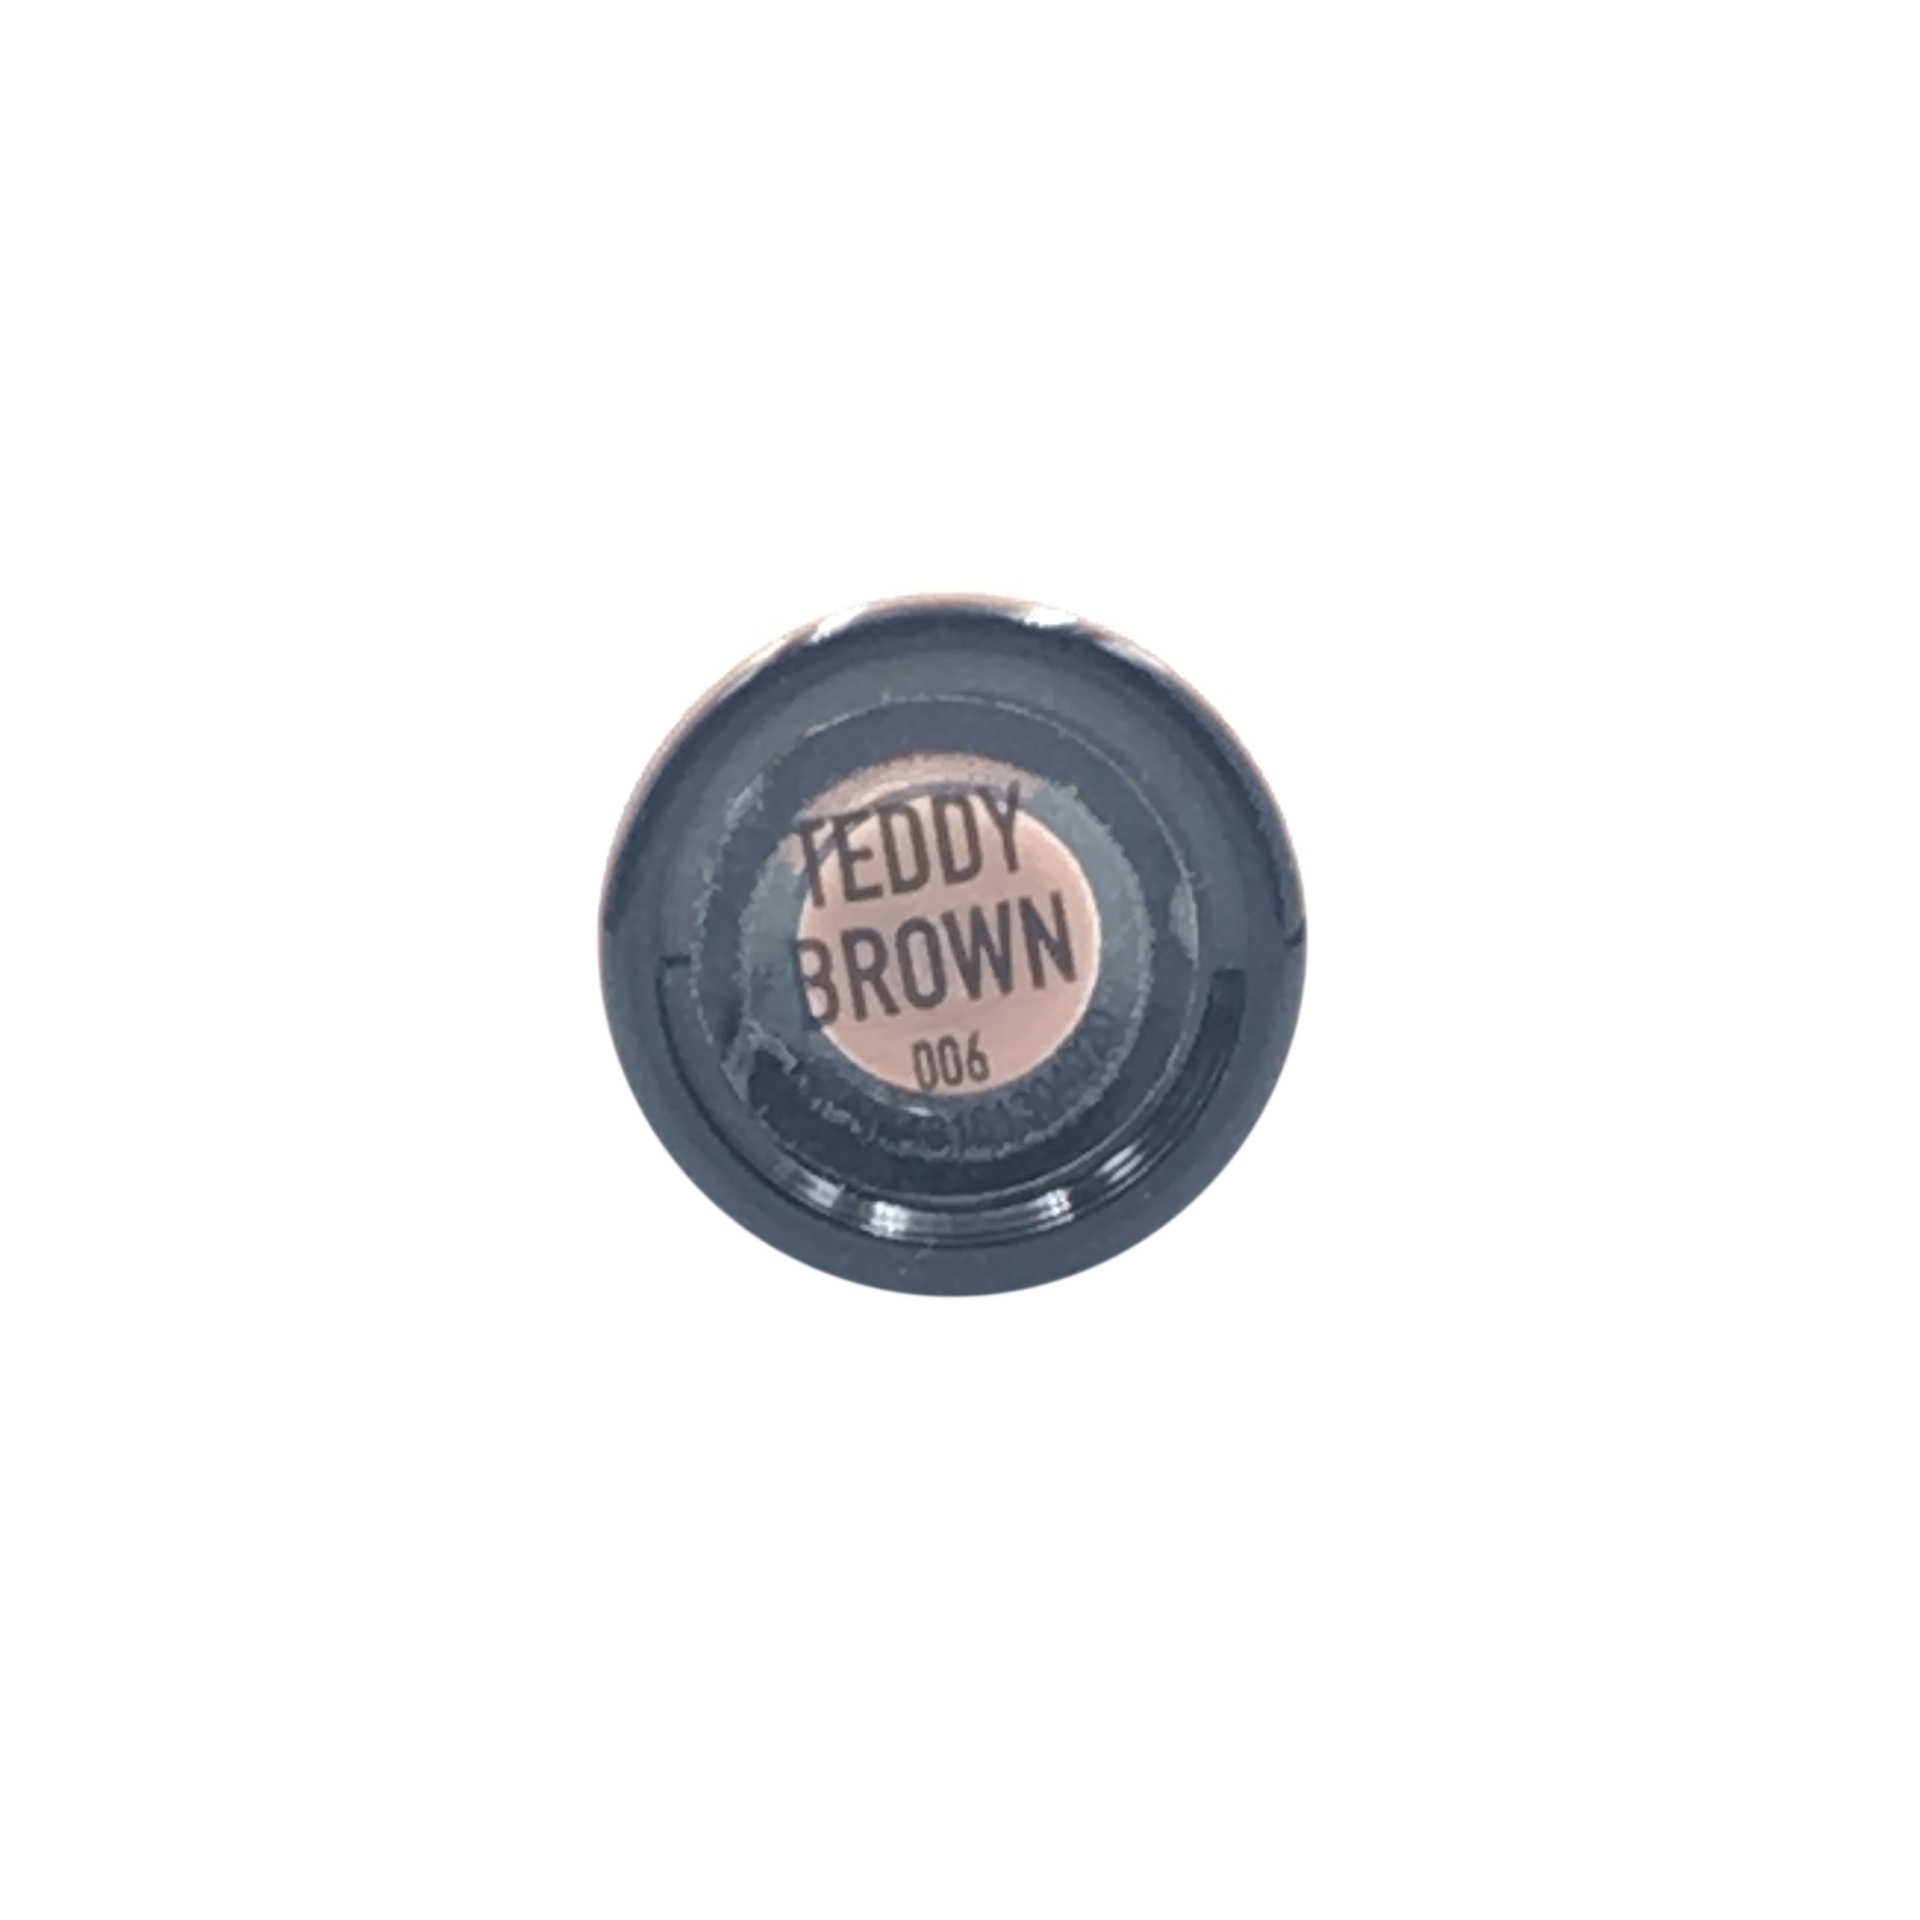 Goban Teddy Brown Melted Matte Lips